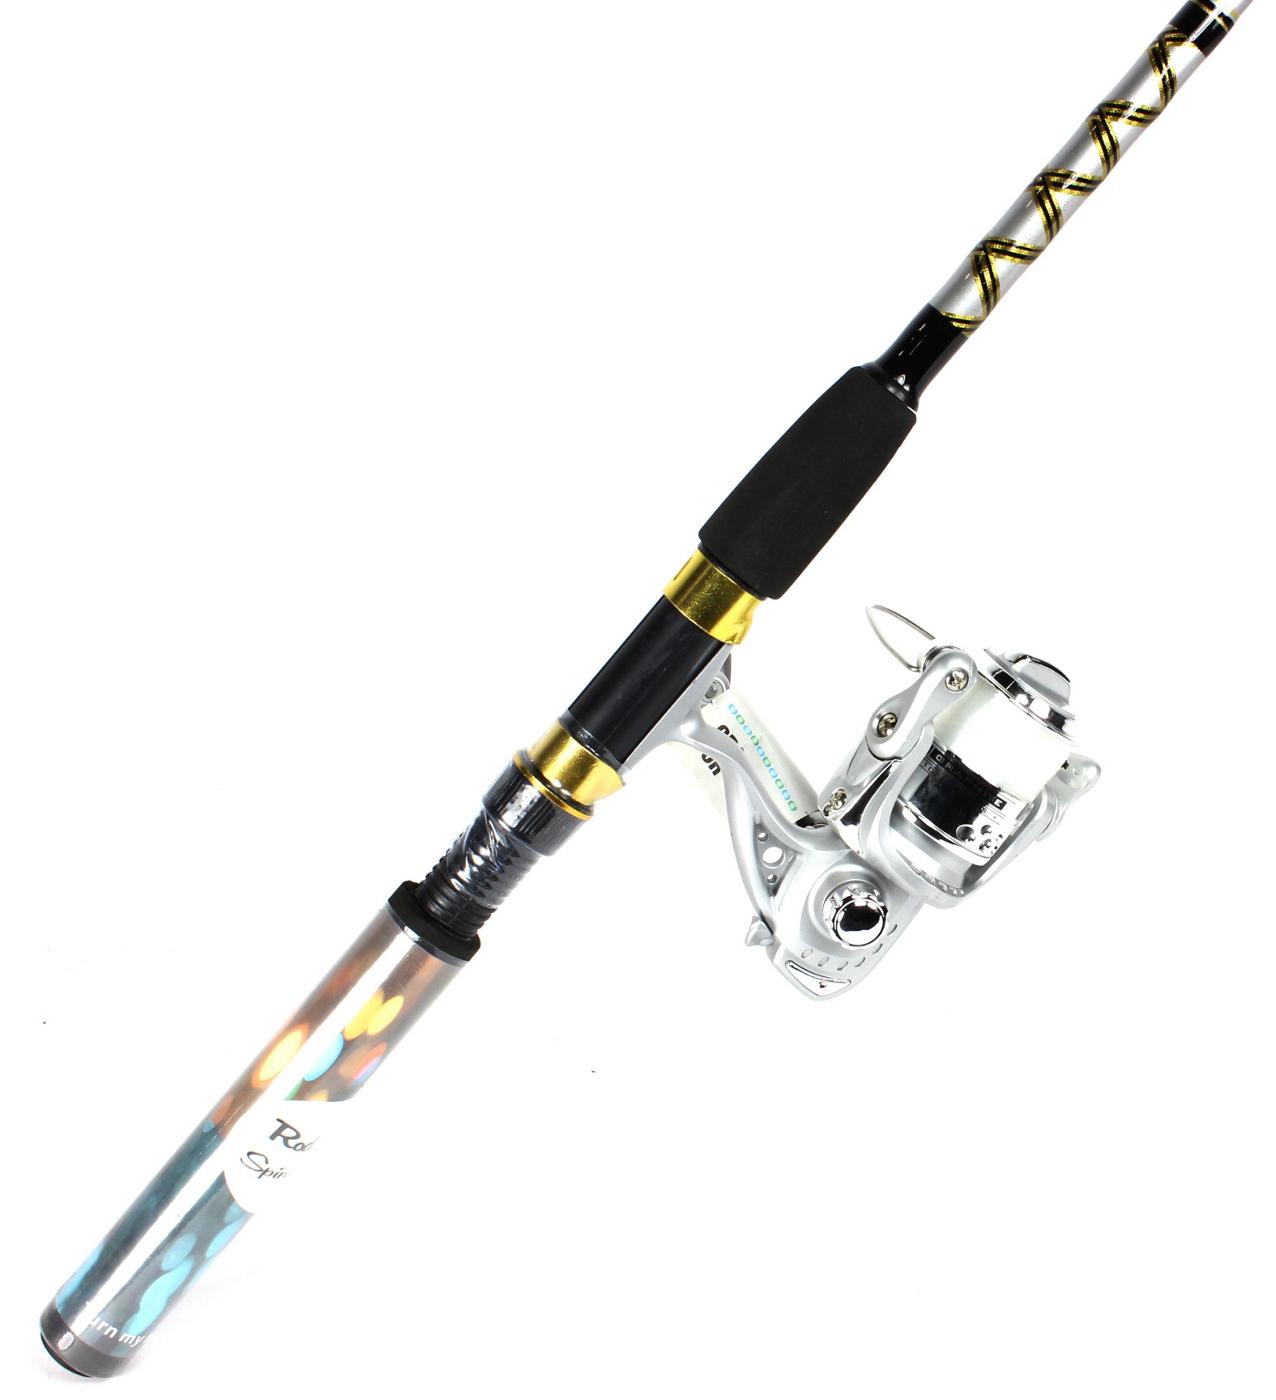 Master 6' 6'' Silver Lite Spinning Combo Rod - Shop Fishing at H-E-B